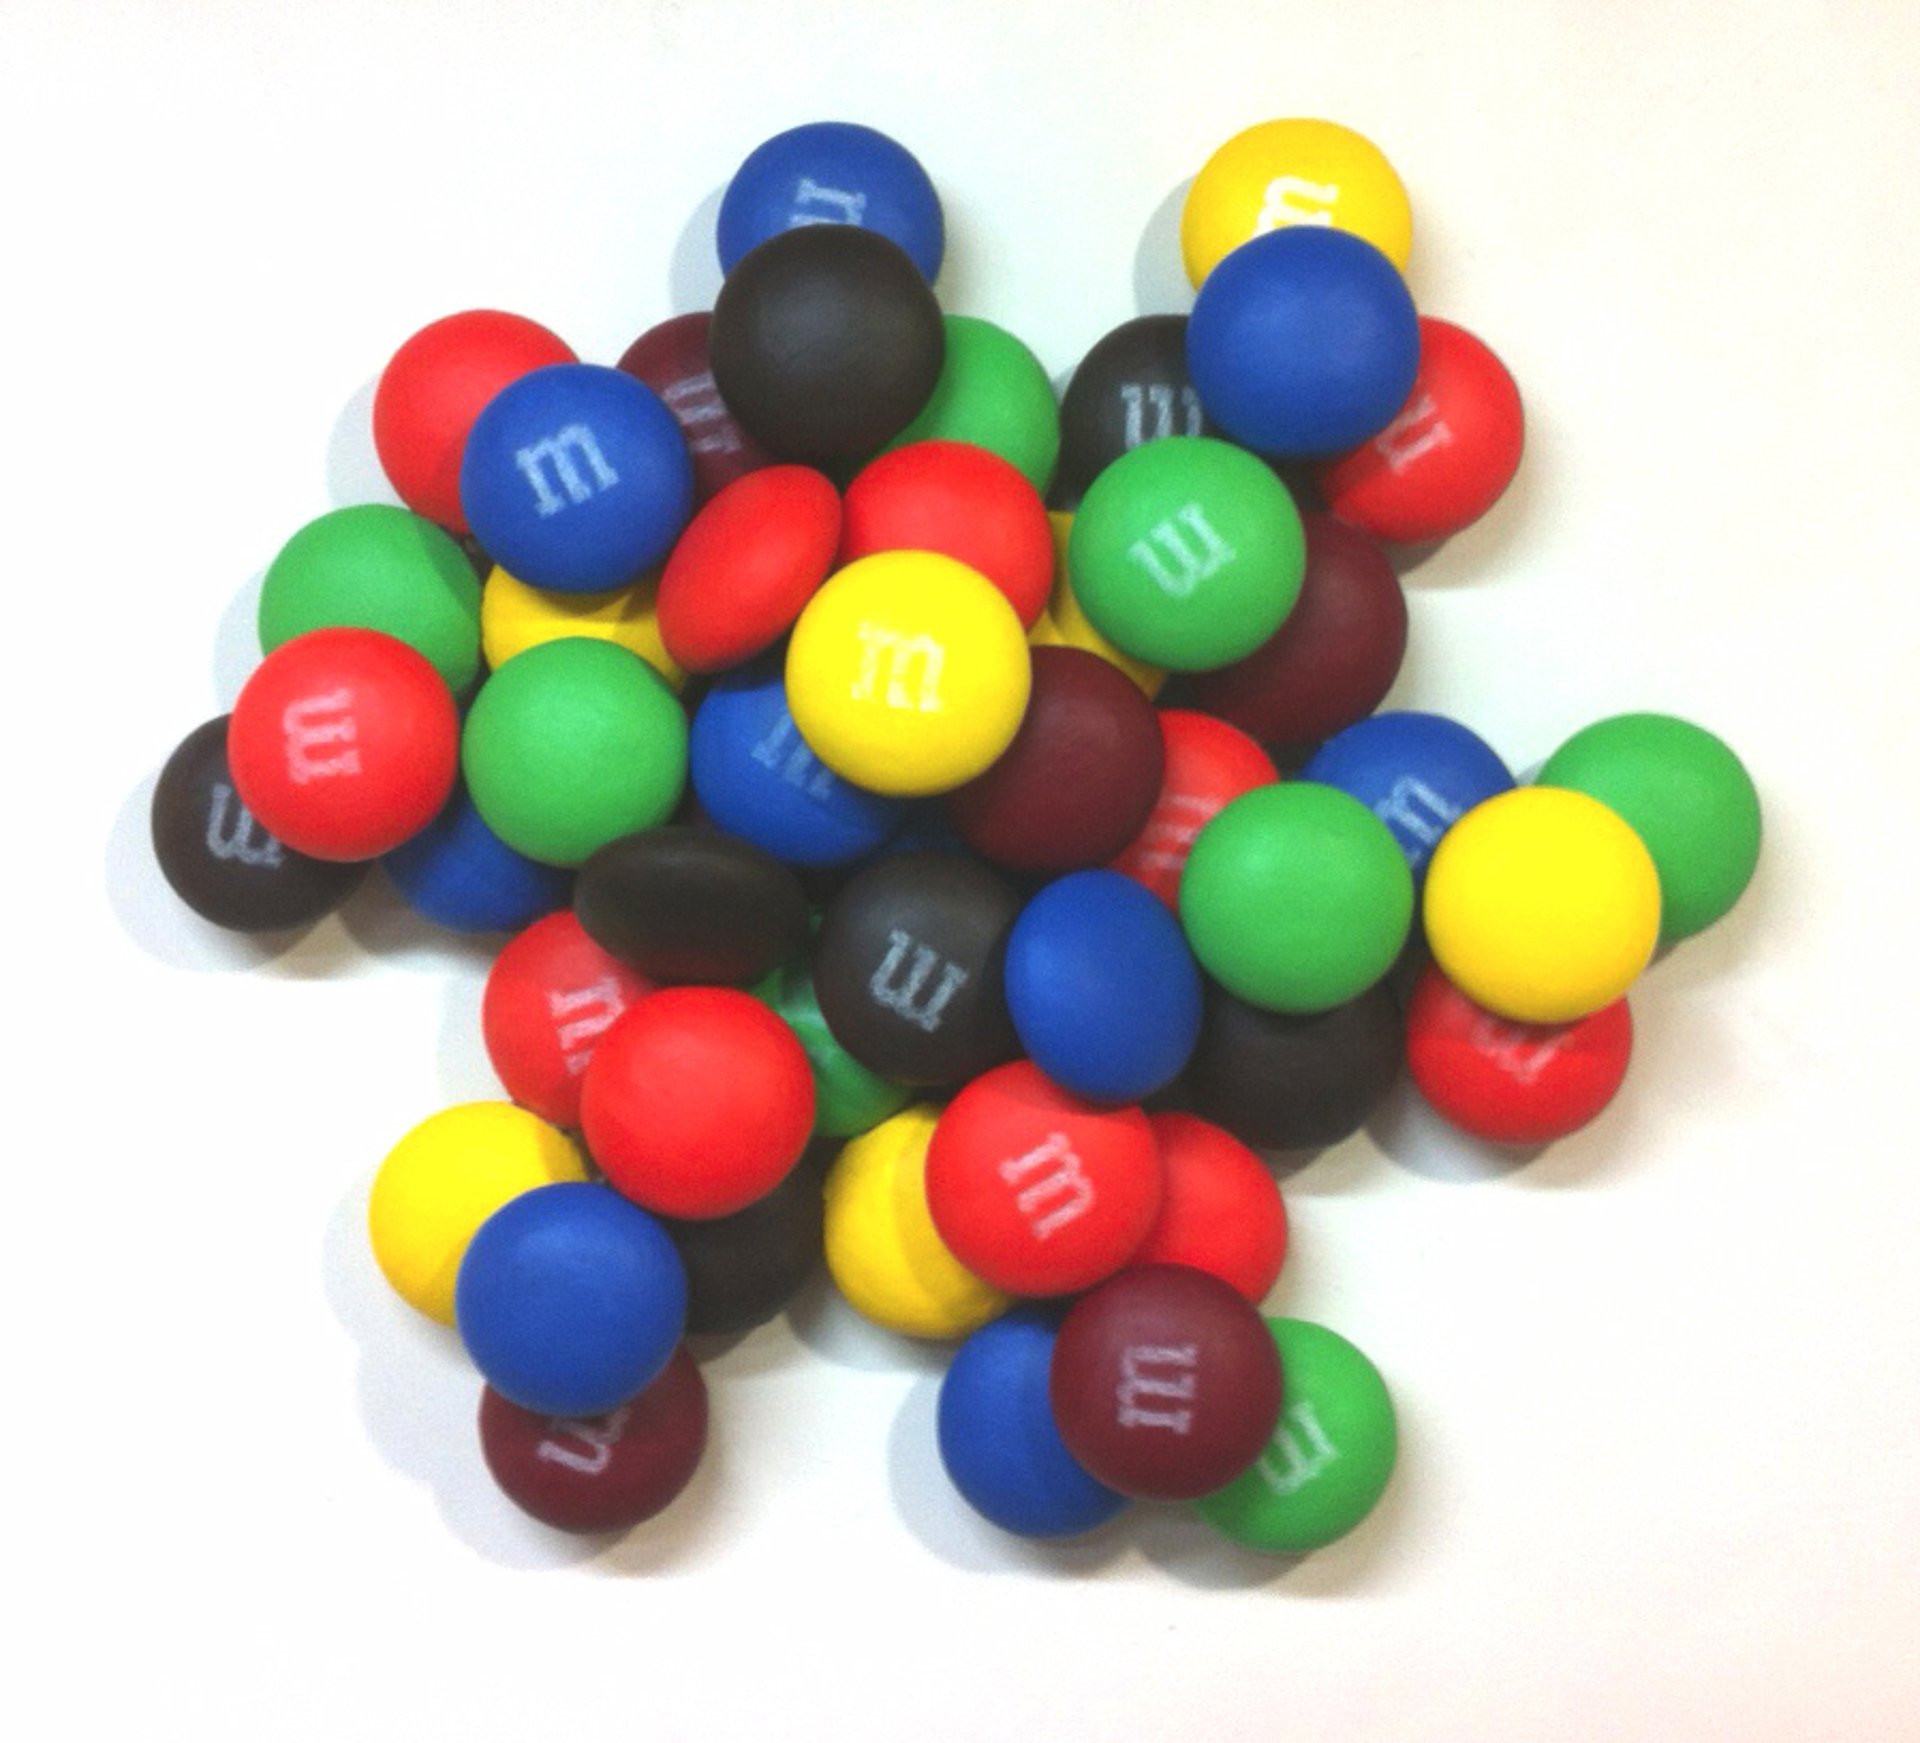 Melts in Your Mouth, Not in Your Hand (M&Ms) by Rick Biehl